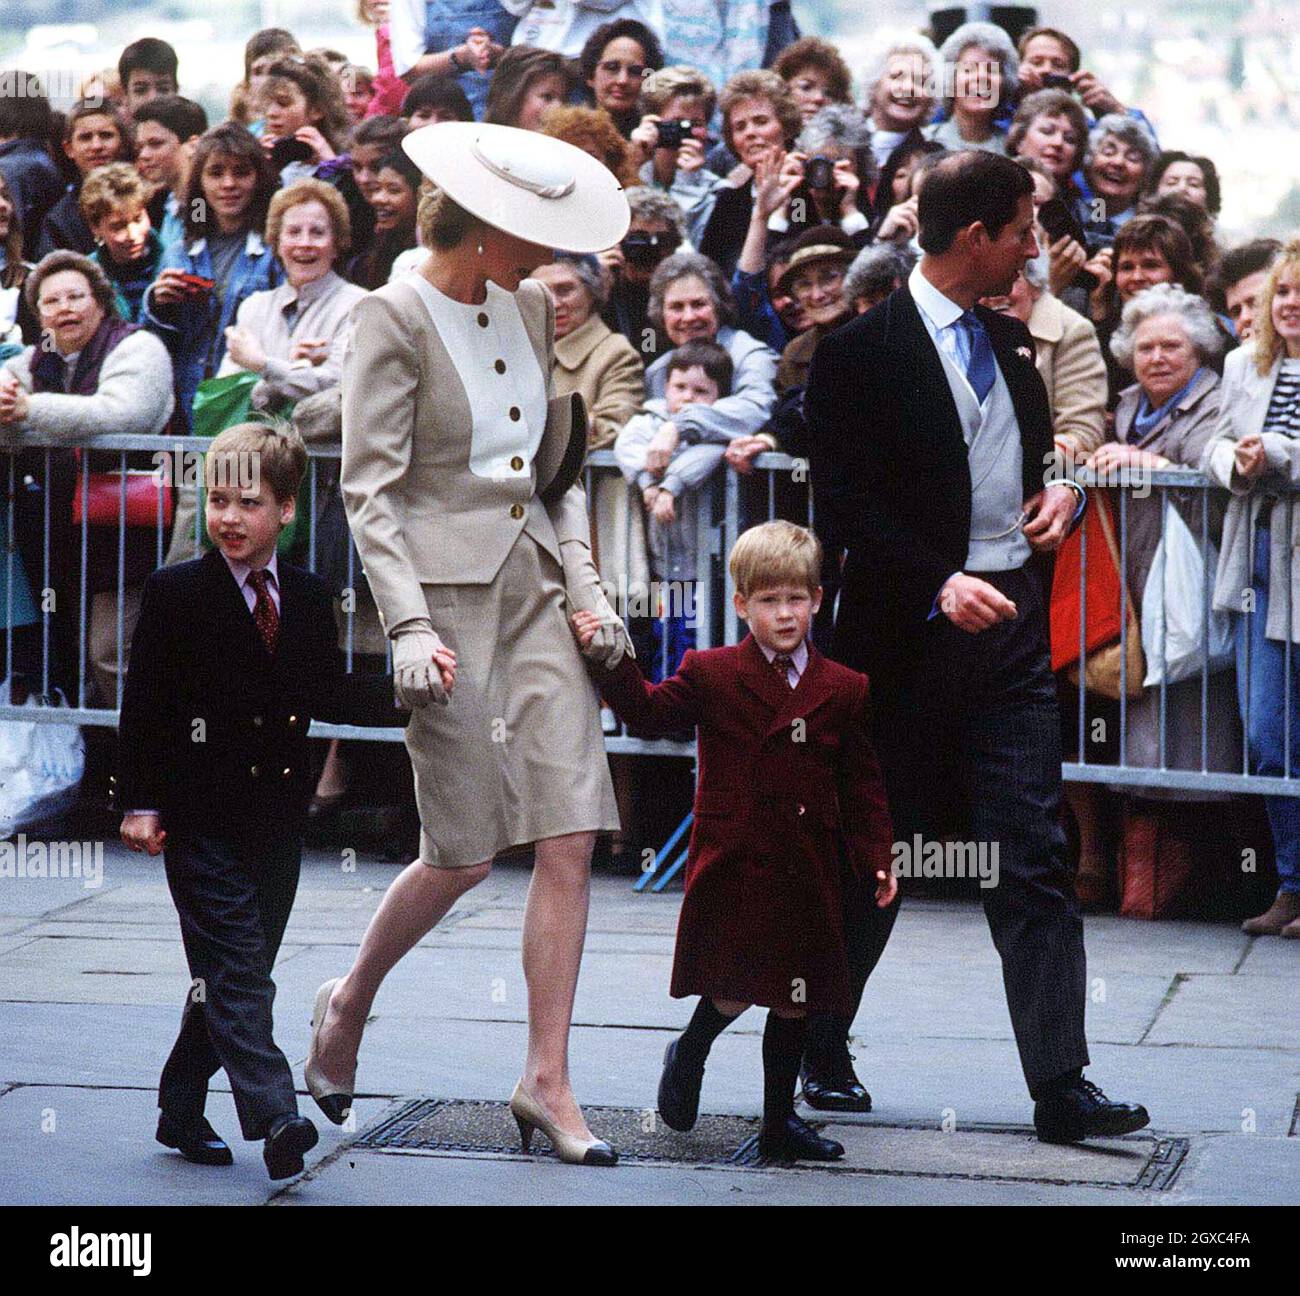 Prince William, Diana, Princess of Wales, Prince Harry and Prince Charles, Prince of Wales, attend the wedding of the Duke of Hussey's daughter in May, 1989 in Bath, England. Stock Photo